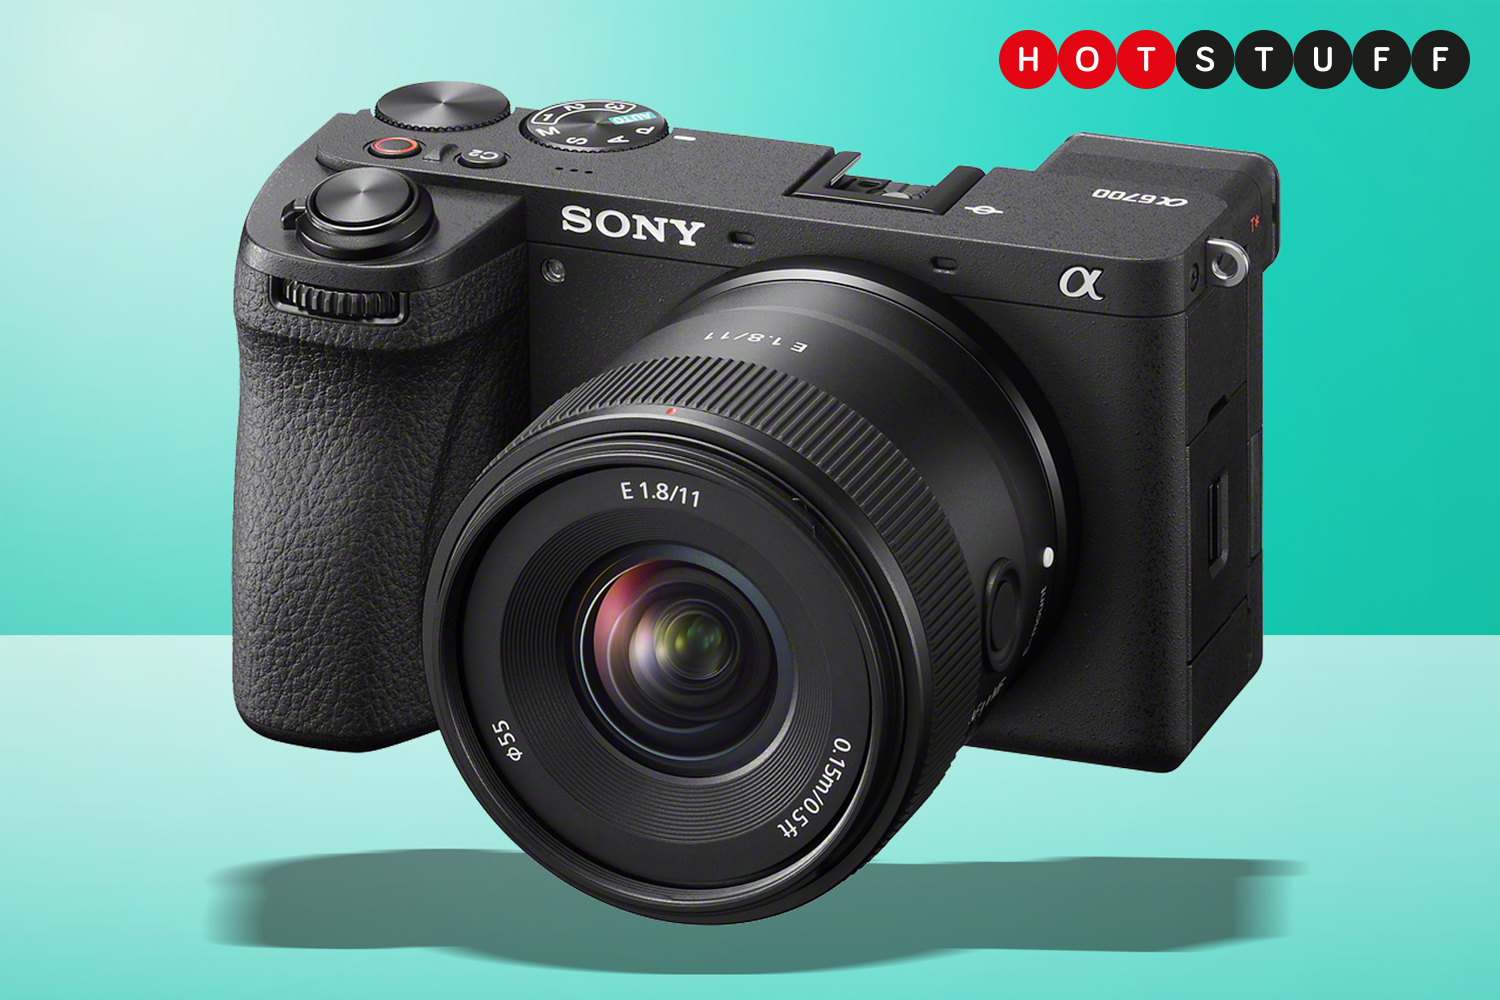 A6700 is the best APS-C camera Sony offers with improved ergonomics,  excellent AF System and increased Video capabilities